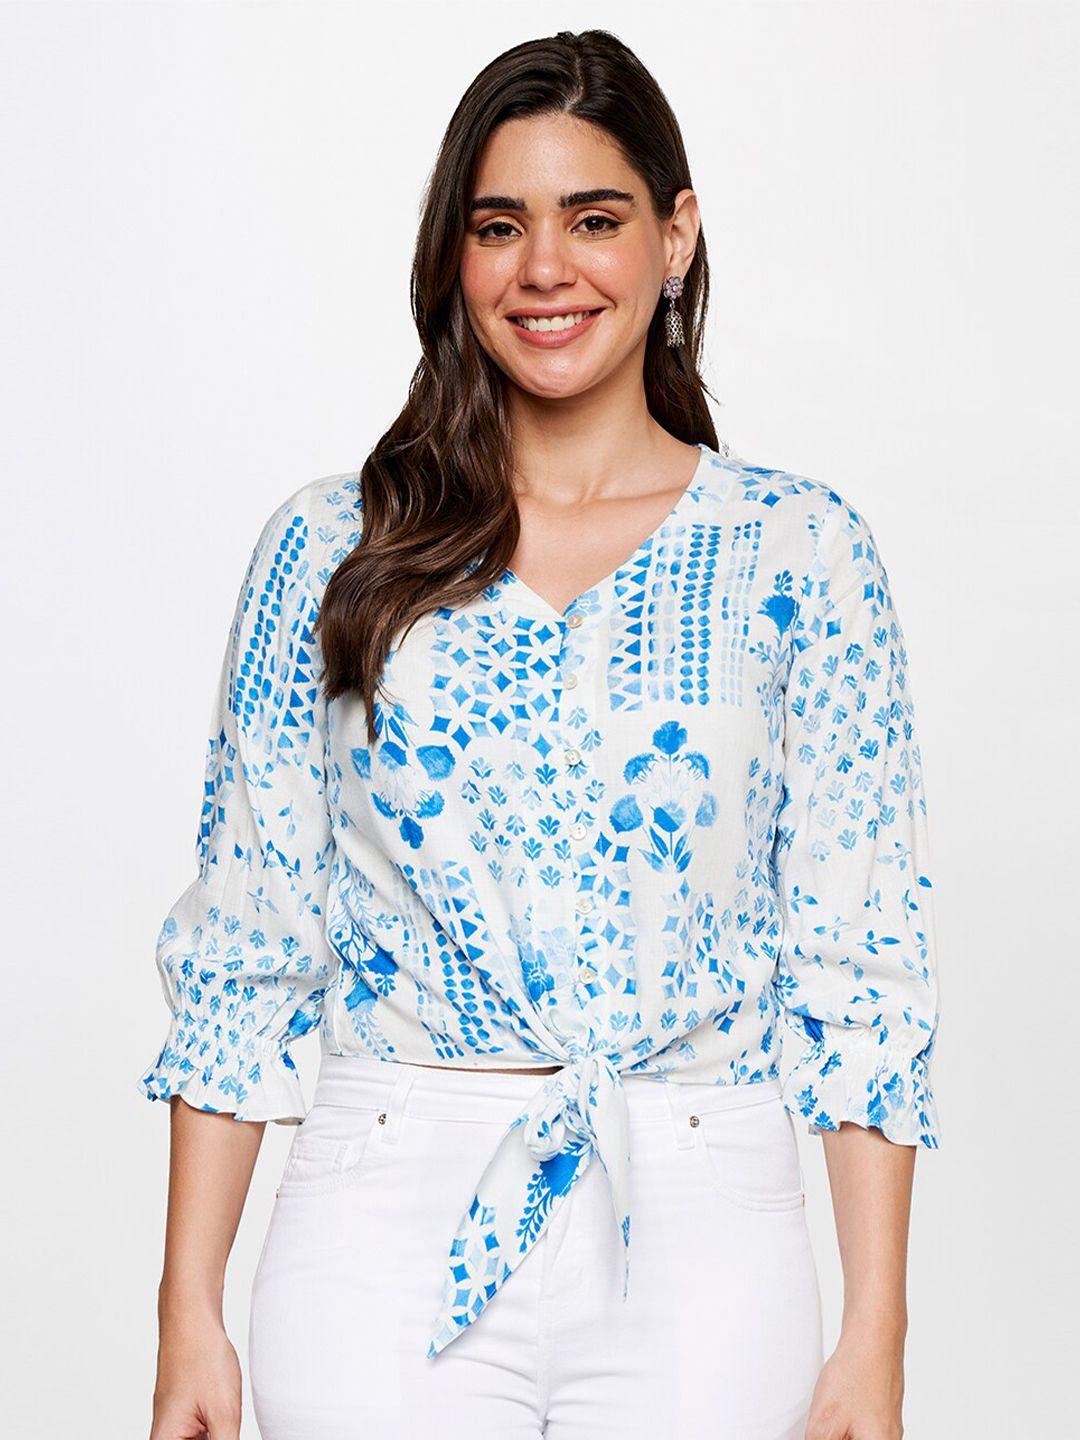 itse-floral-printed-styled-back-waist-tie-ups-casual-top